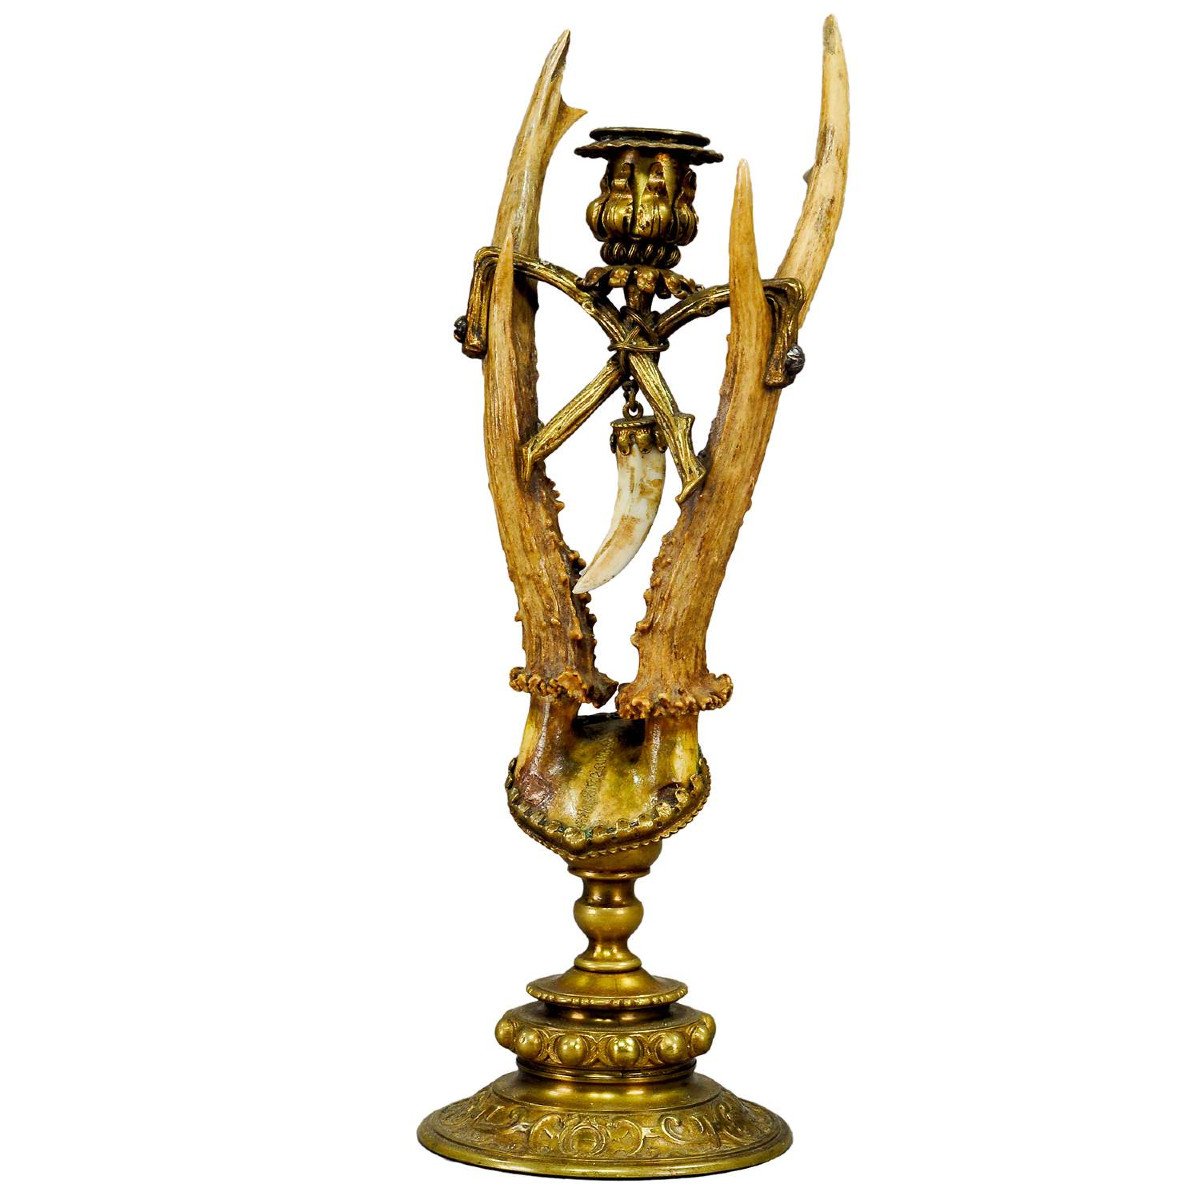 Lodge Style Antler Candleholder With Handforged Brass Base Ca. 1880